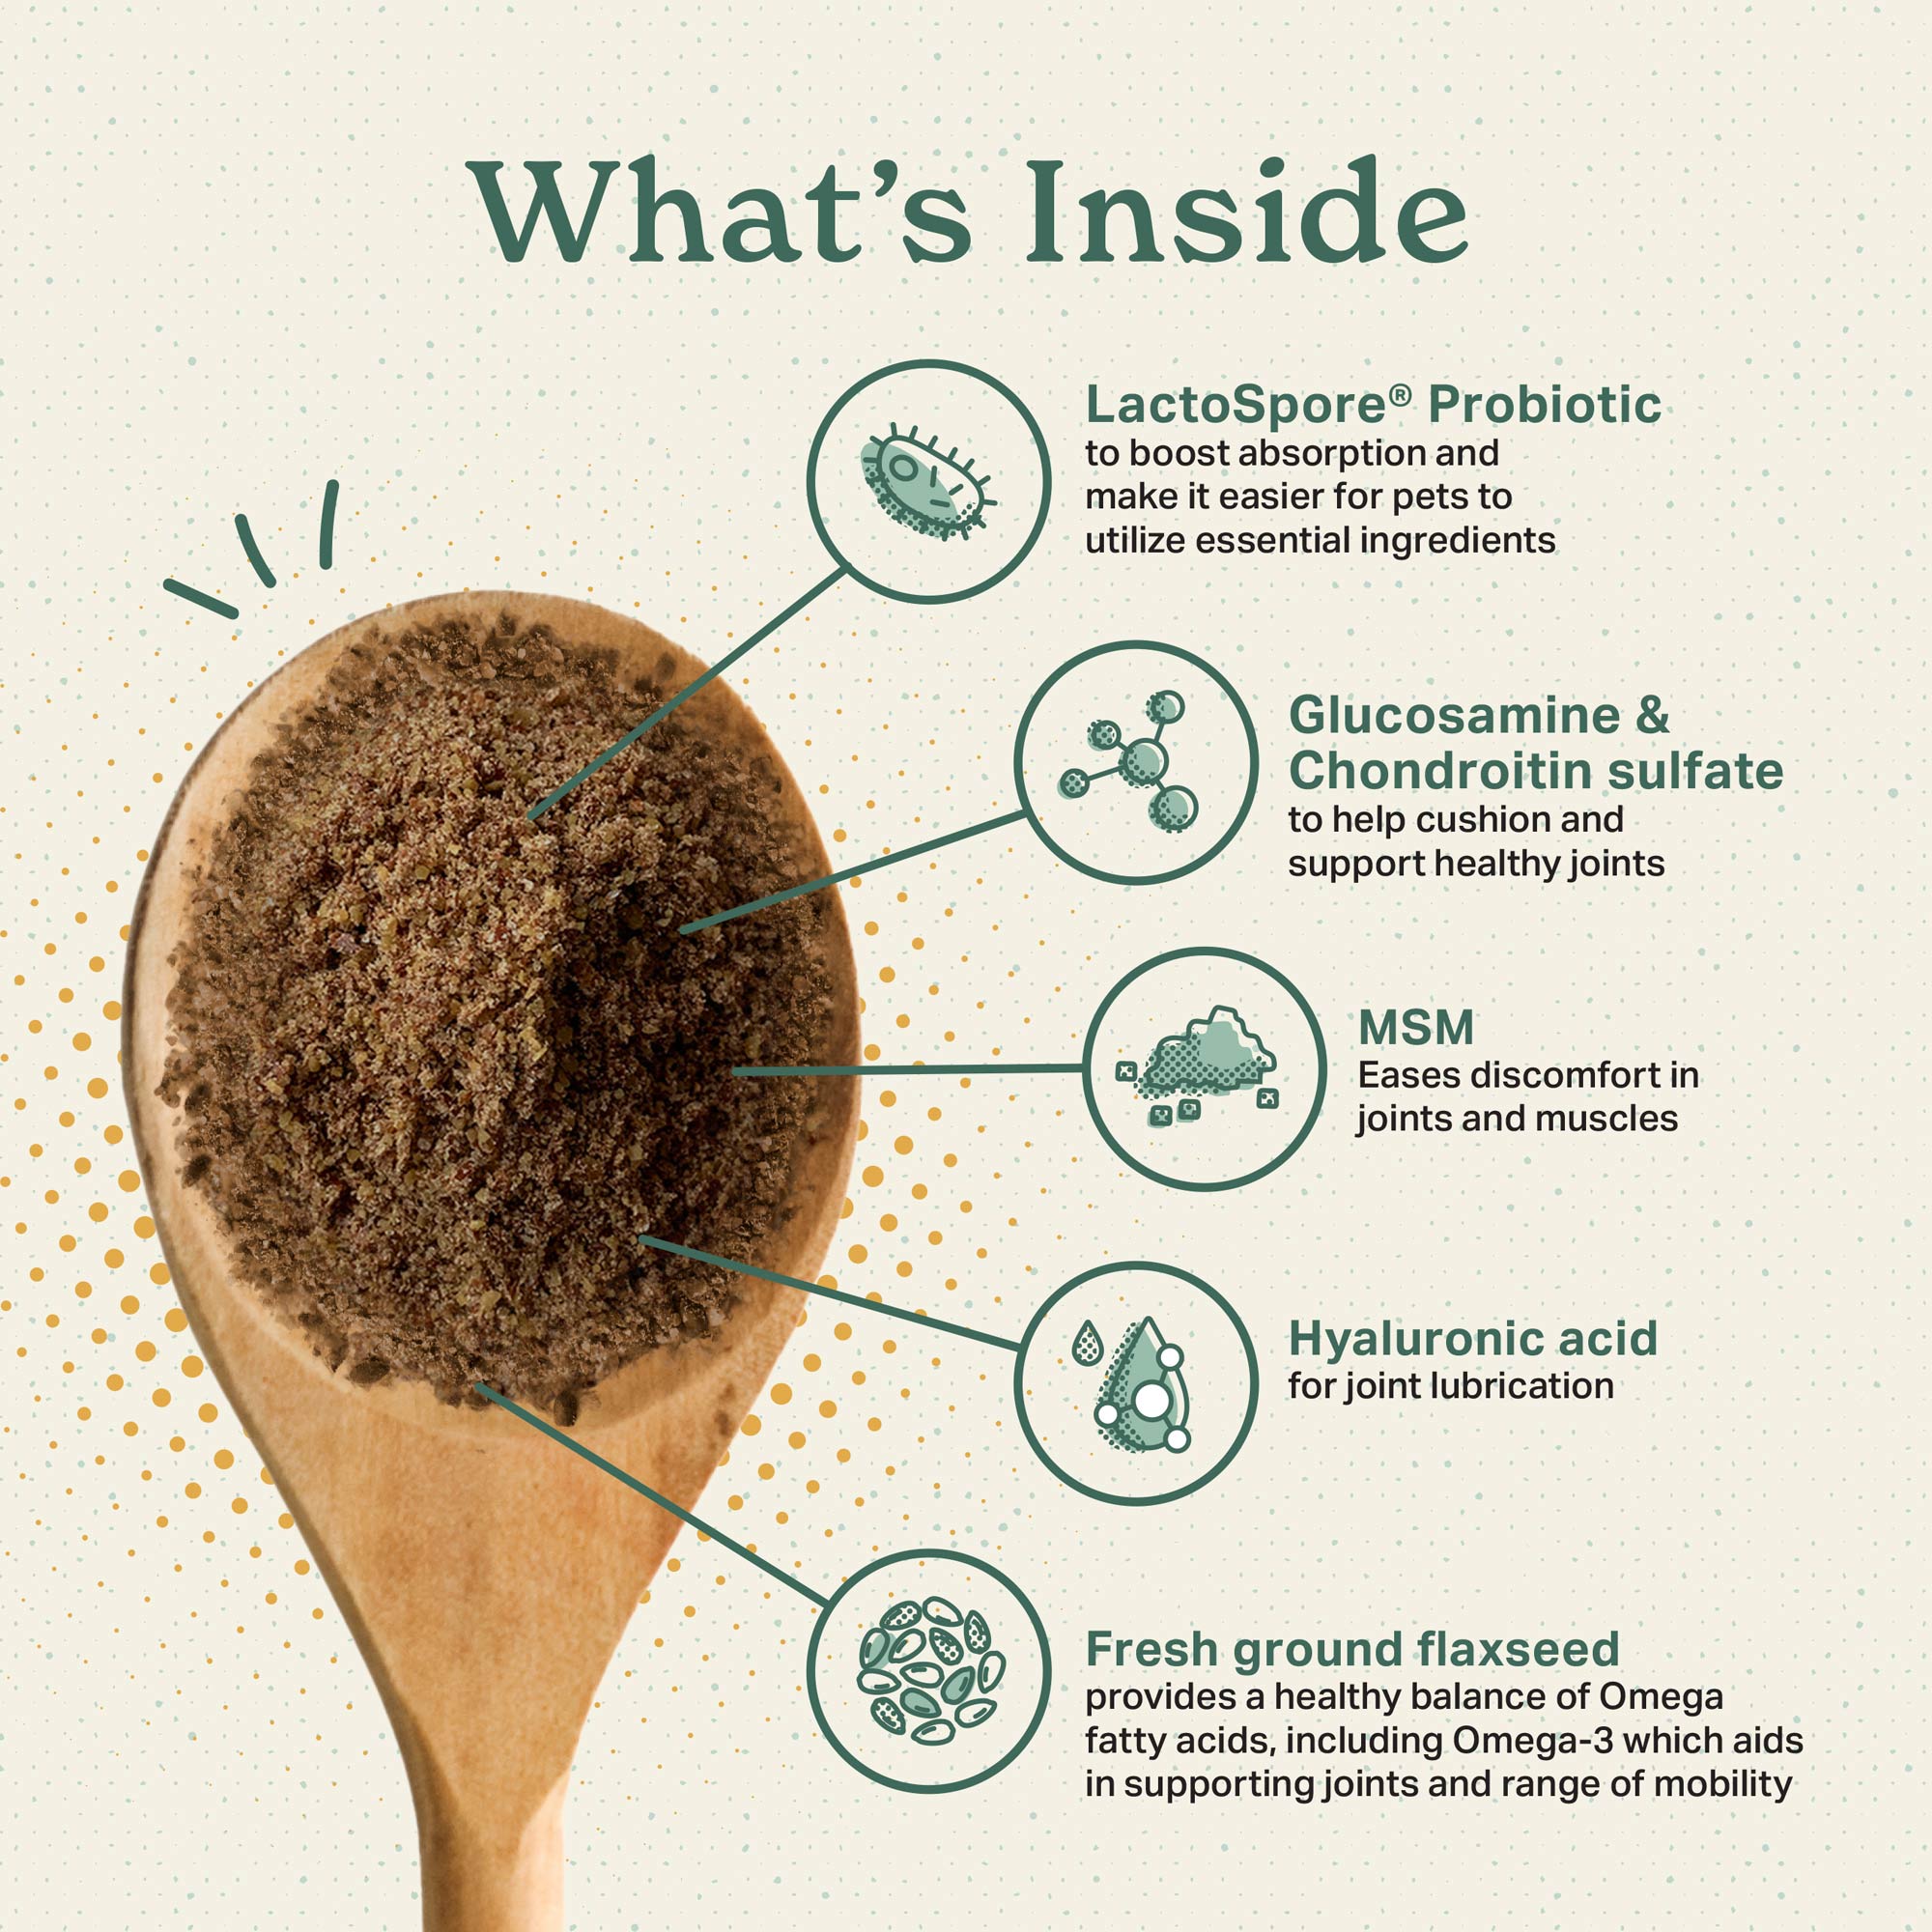 What's inside?  LactoSpore probiotic, glucosamine condroitin sulfate, MSM, hyaluronic acid and fresh ground flaxseed.